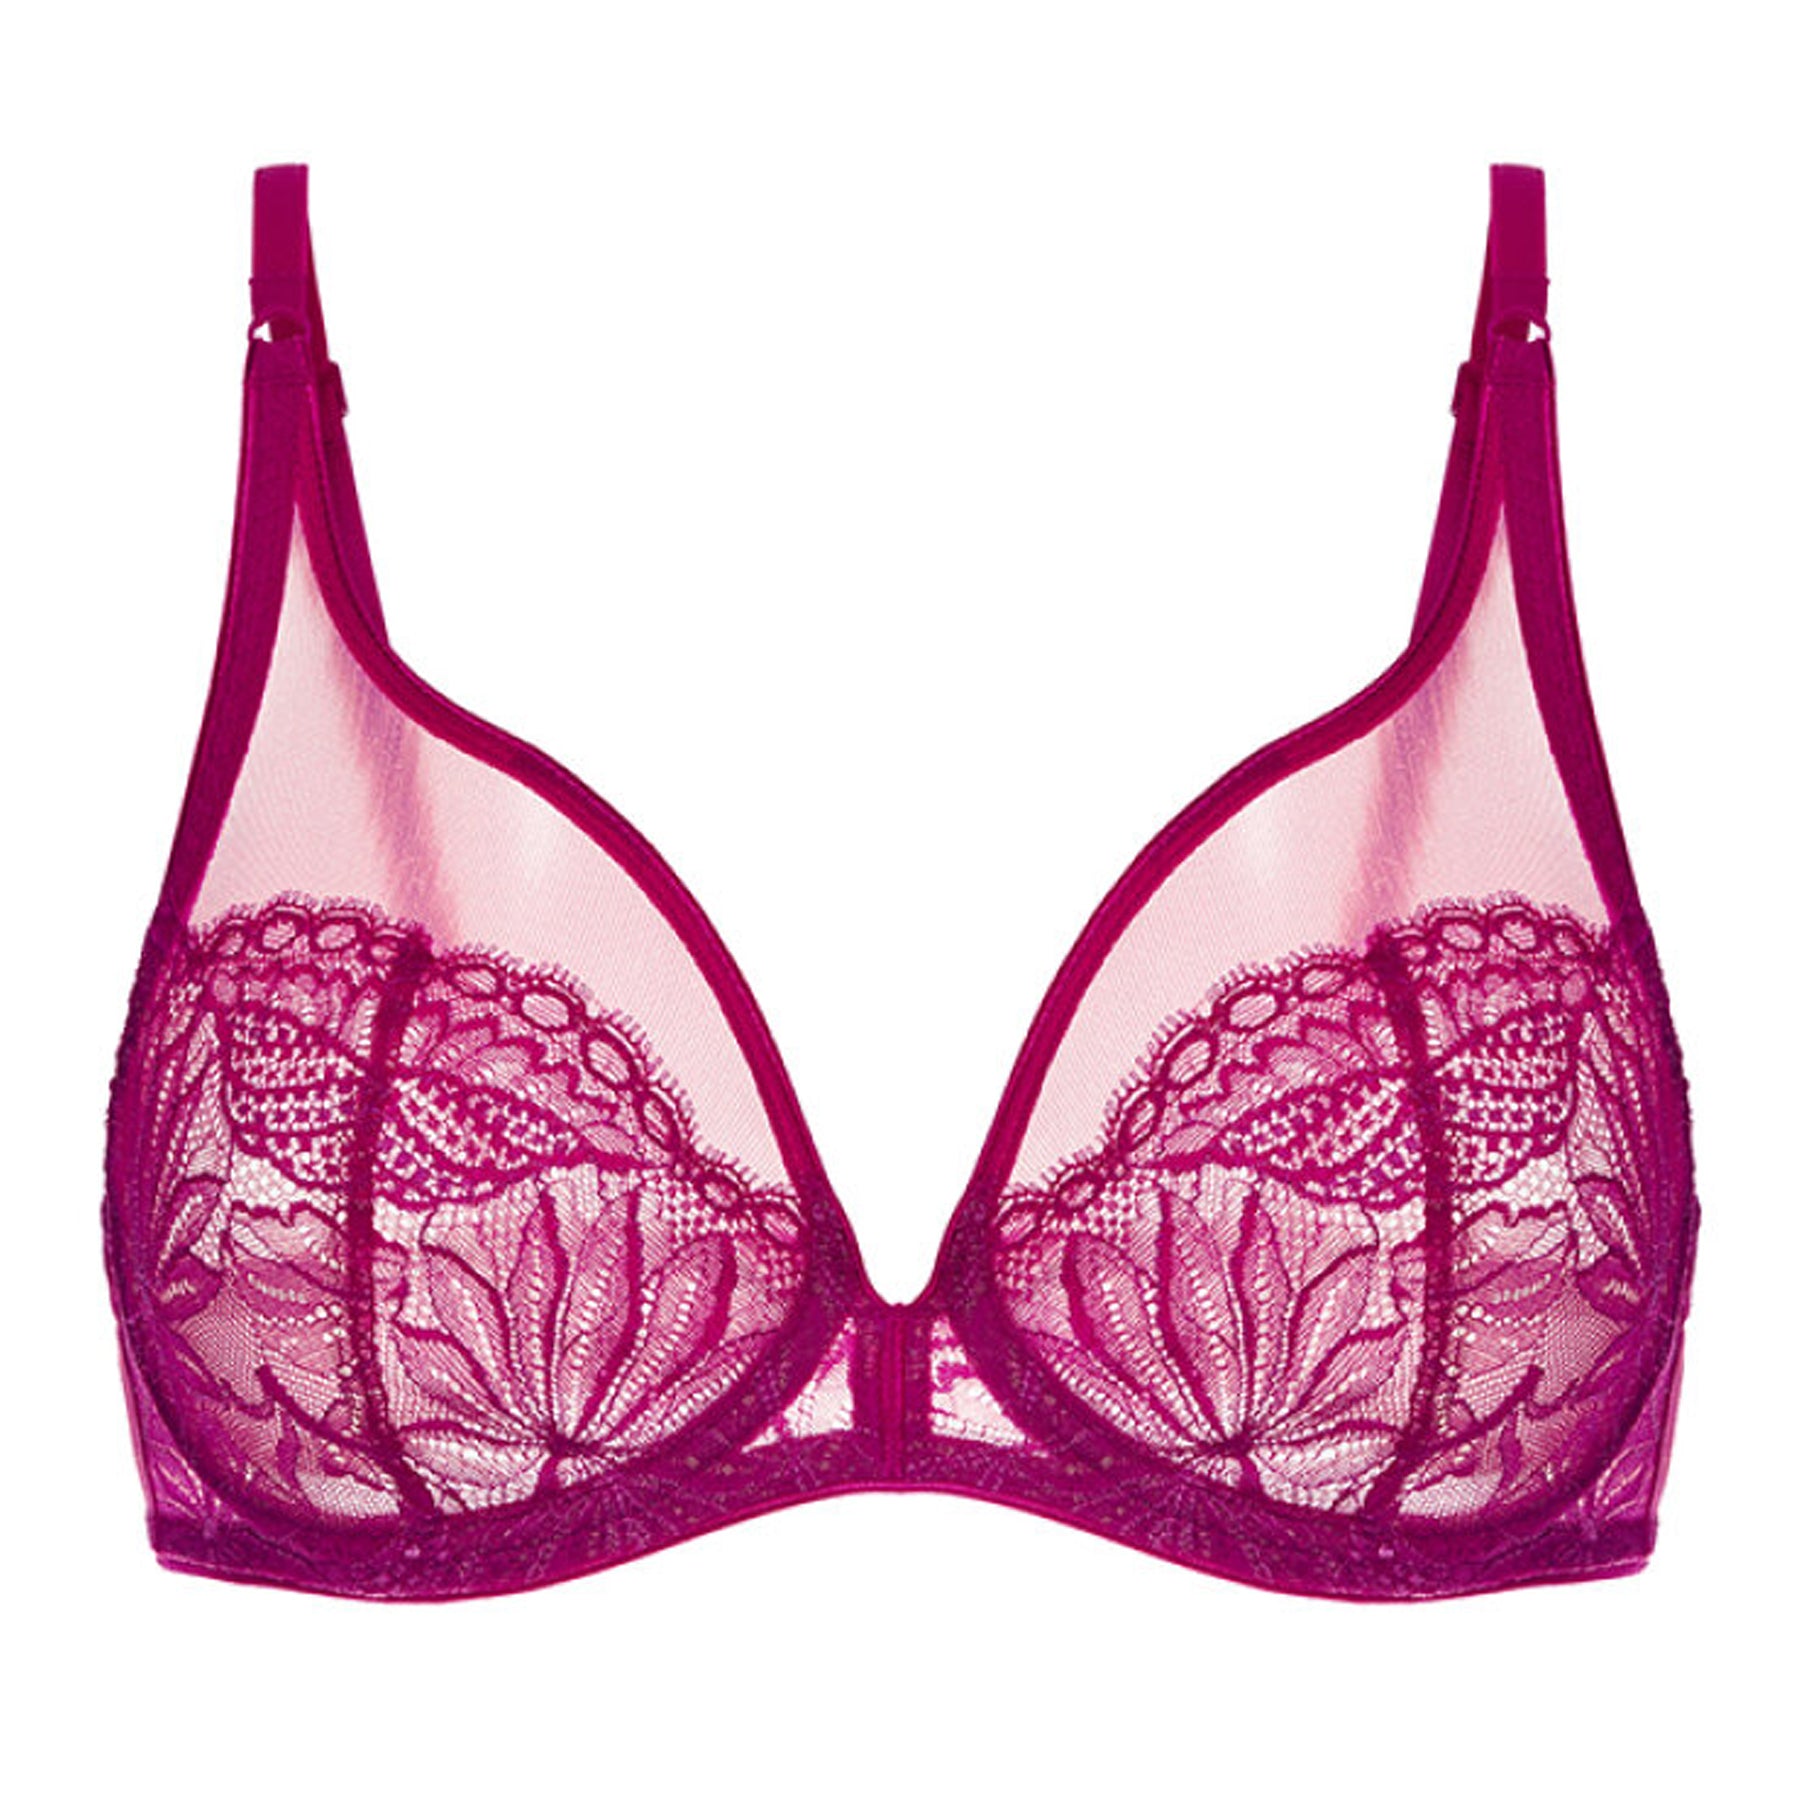 Full Figure Lace Bra Underwire Support New Rosme Lingerie Pavia